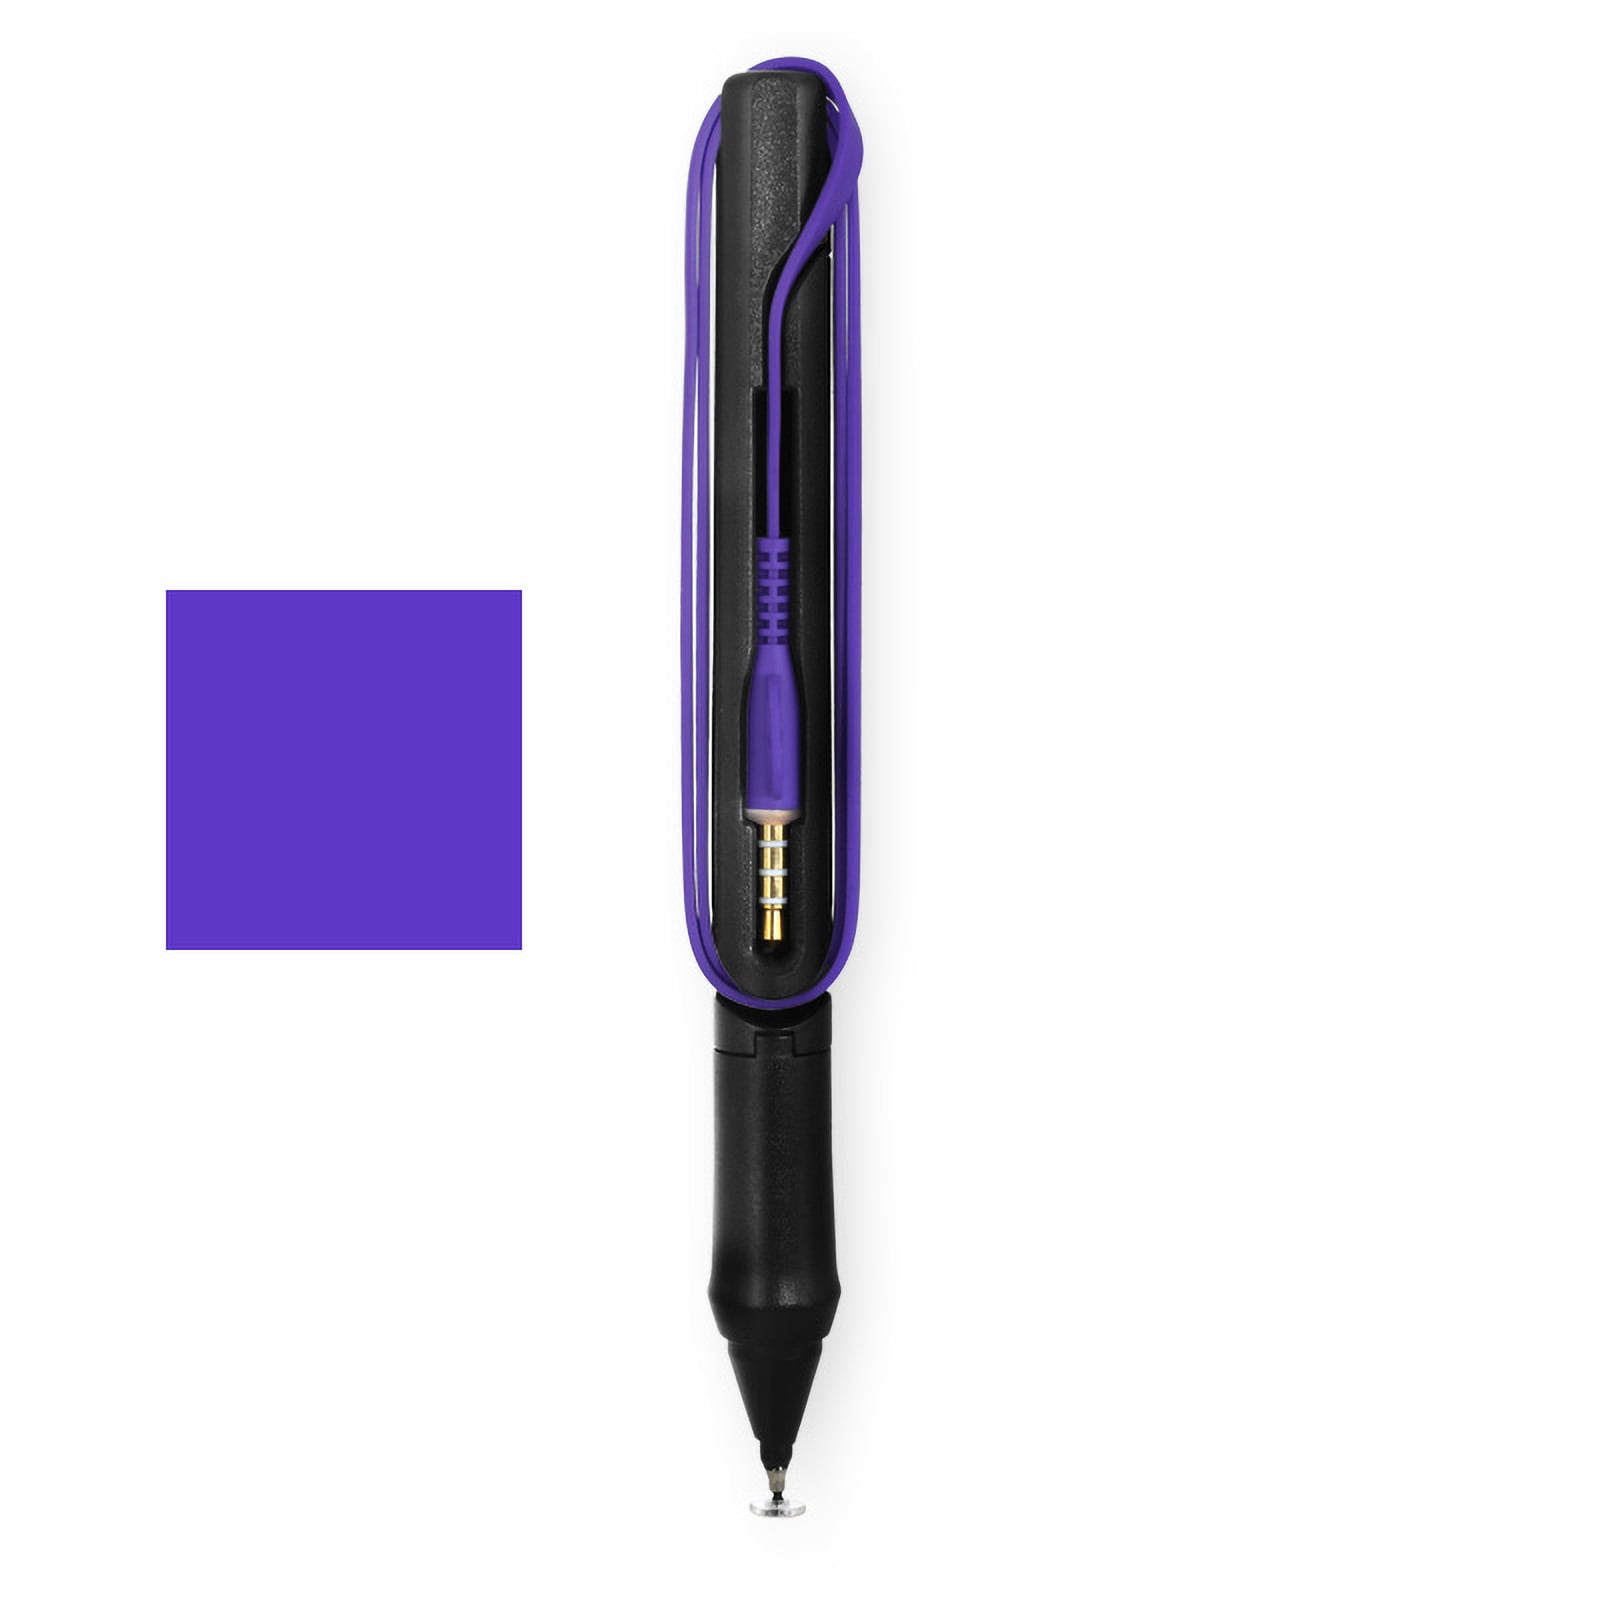 Sensitive Smart Stylus Pen for iPad, iPhone and Android - SonarPen